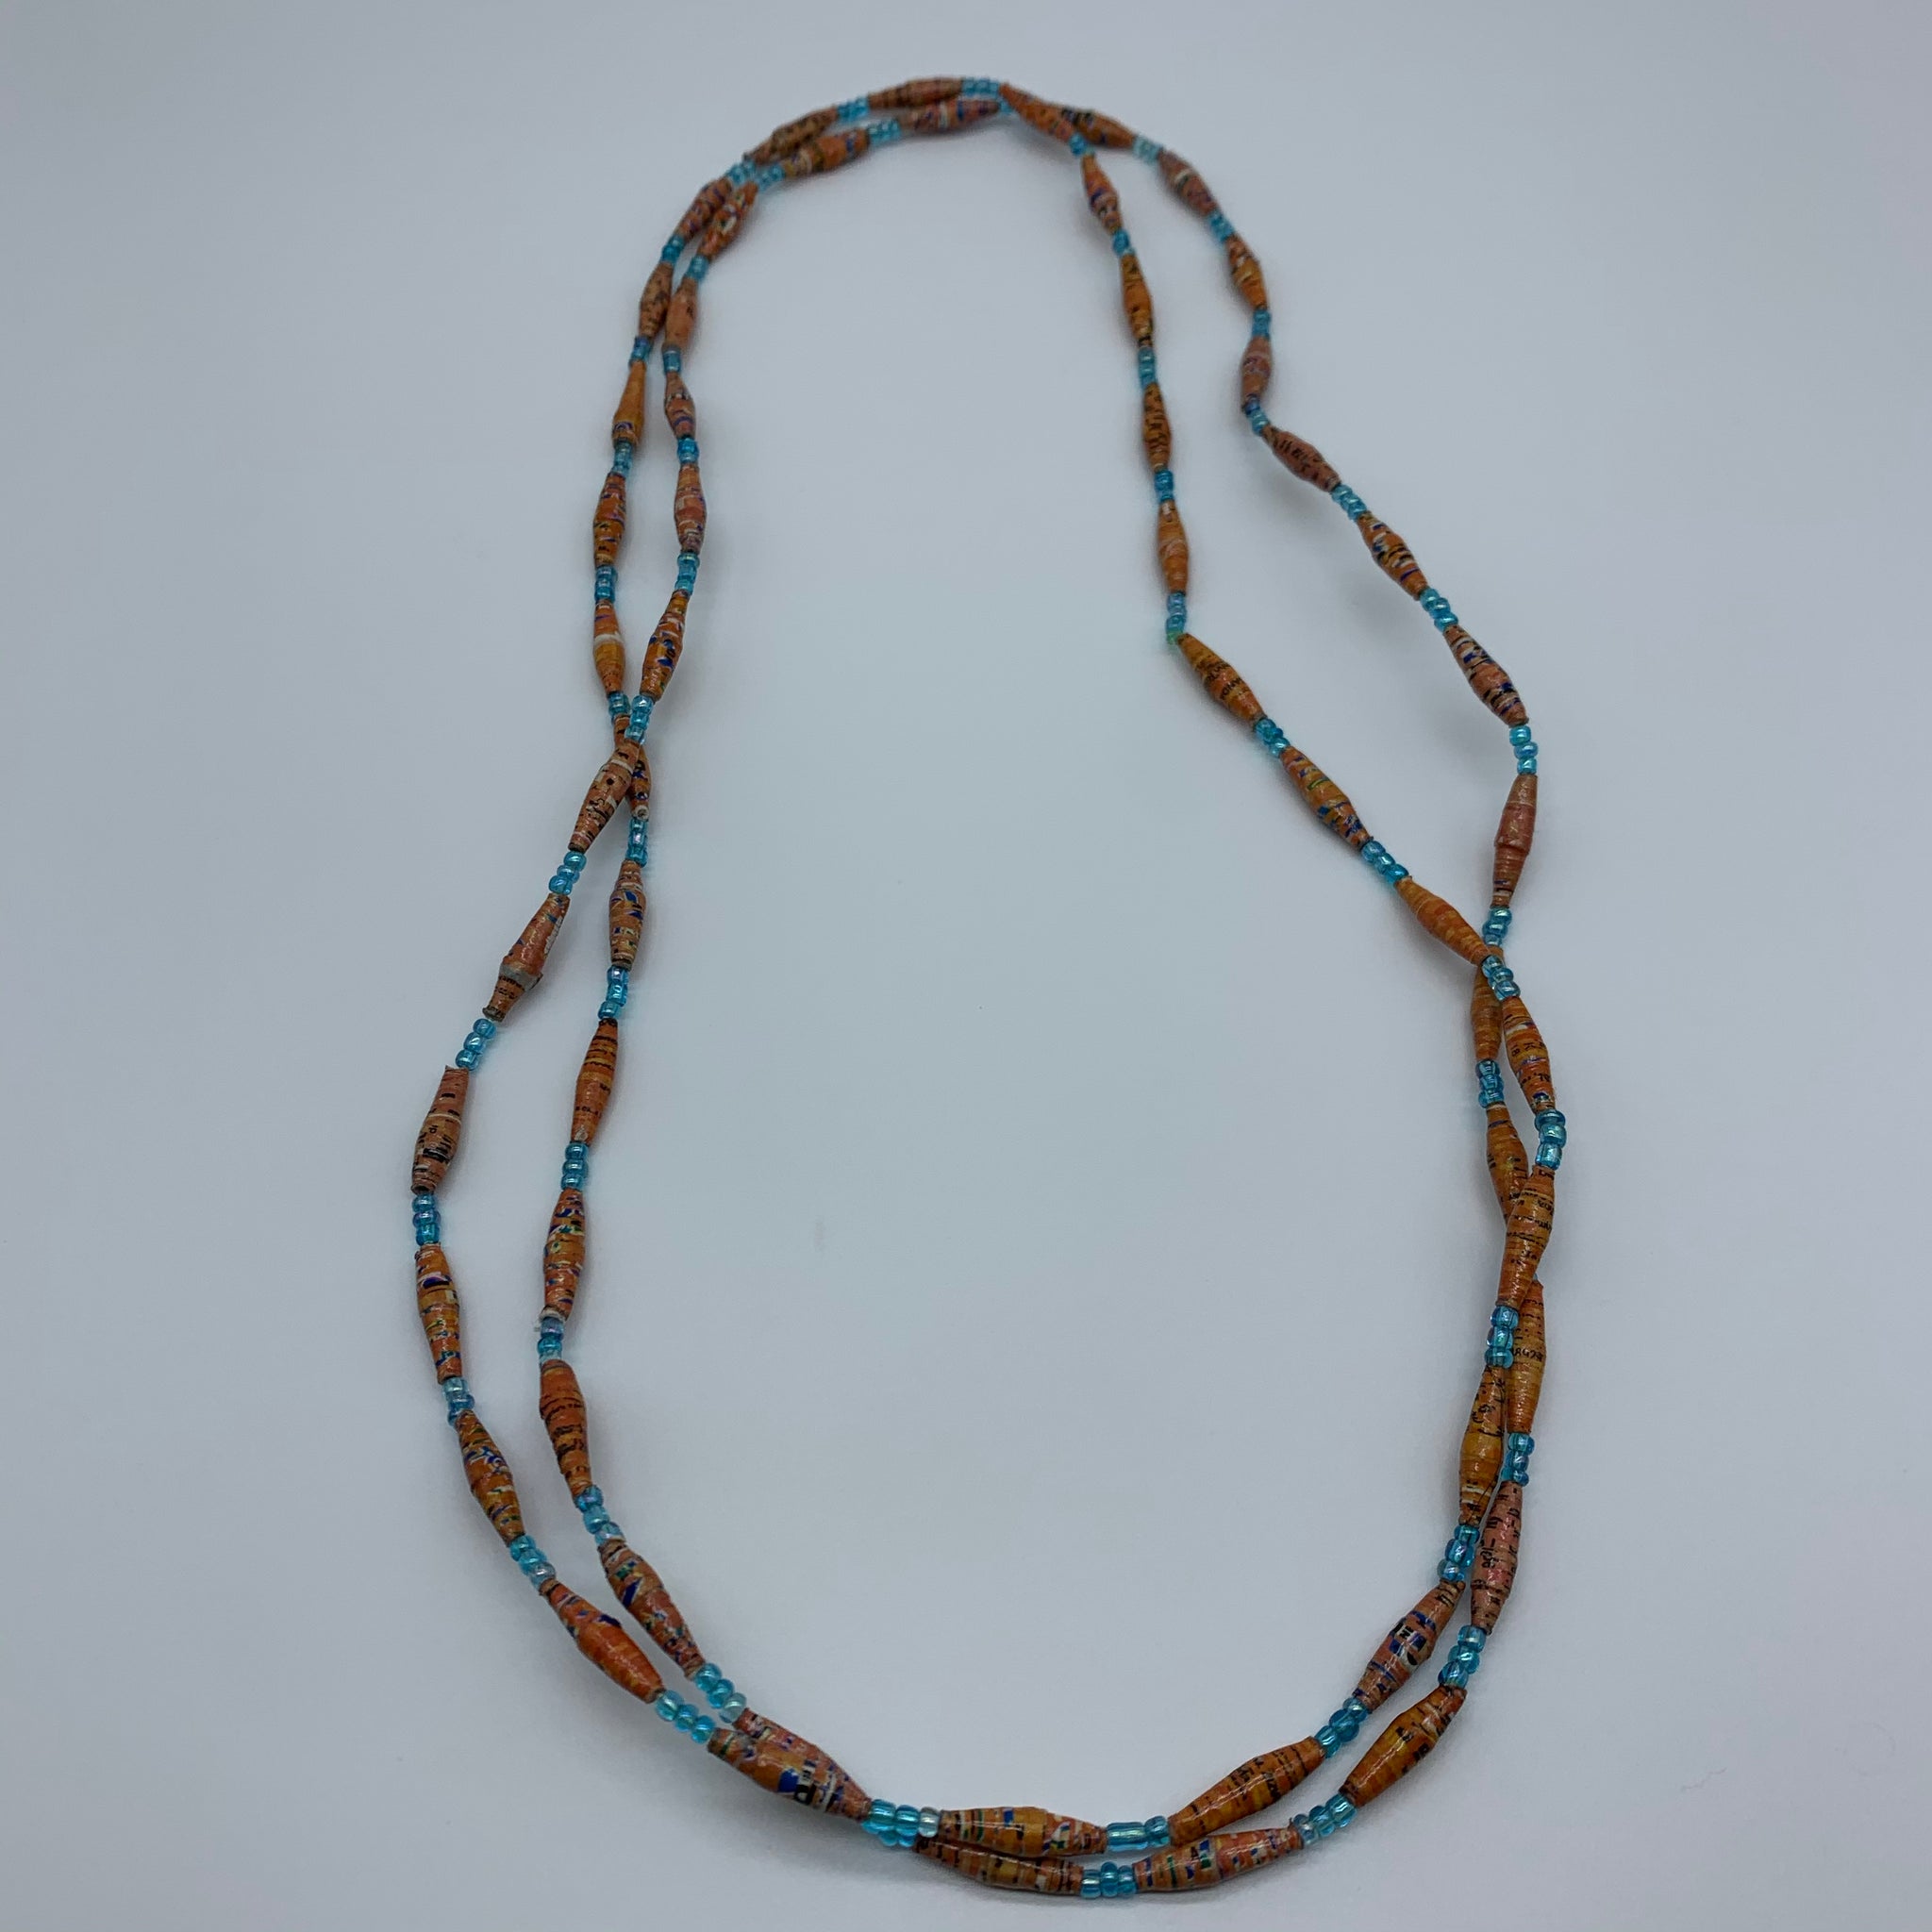 Paper Necklace with Beads-Orange Variation 2